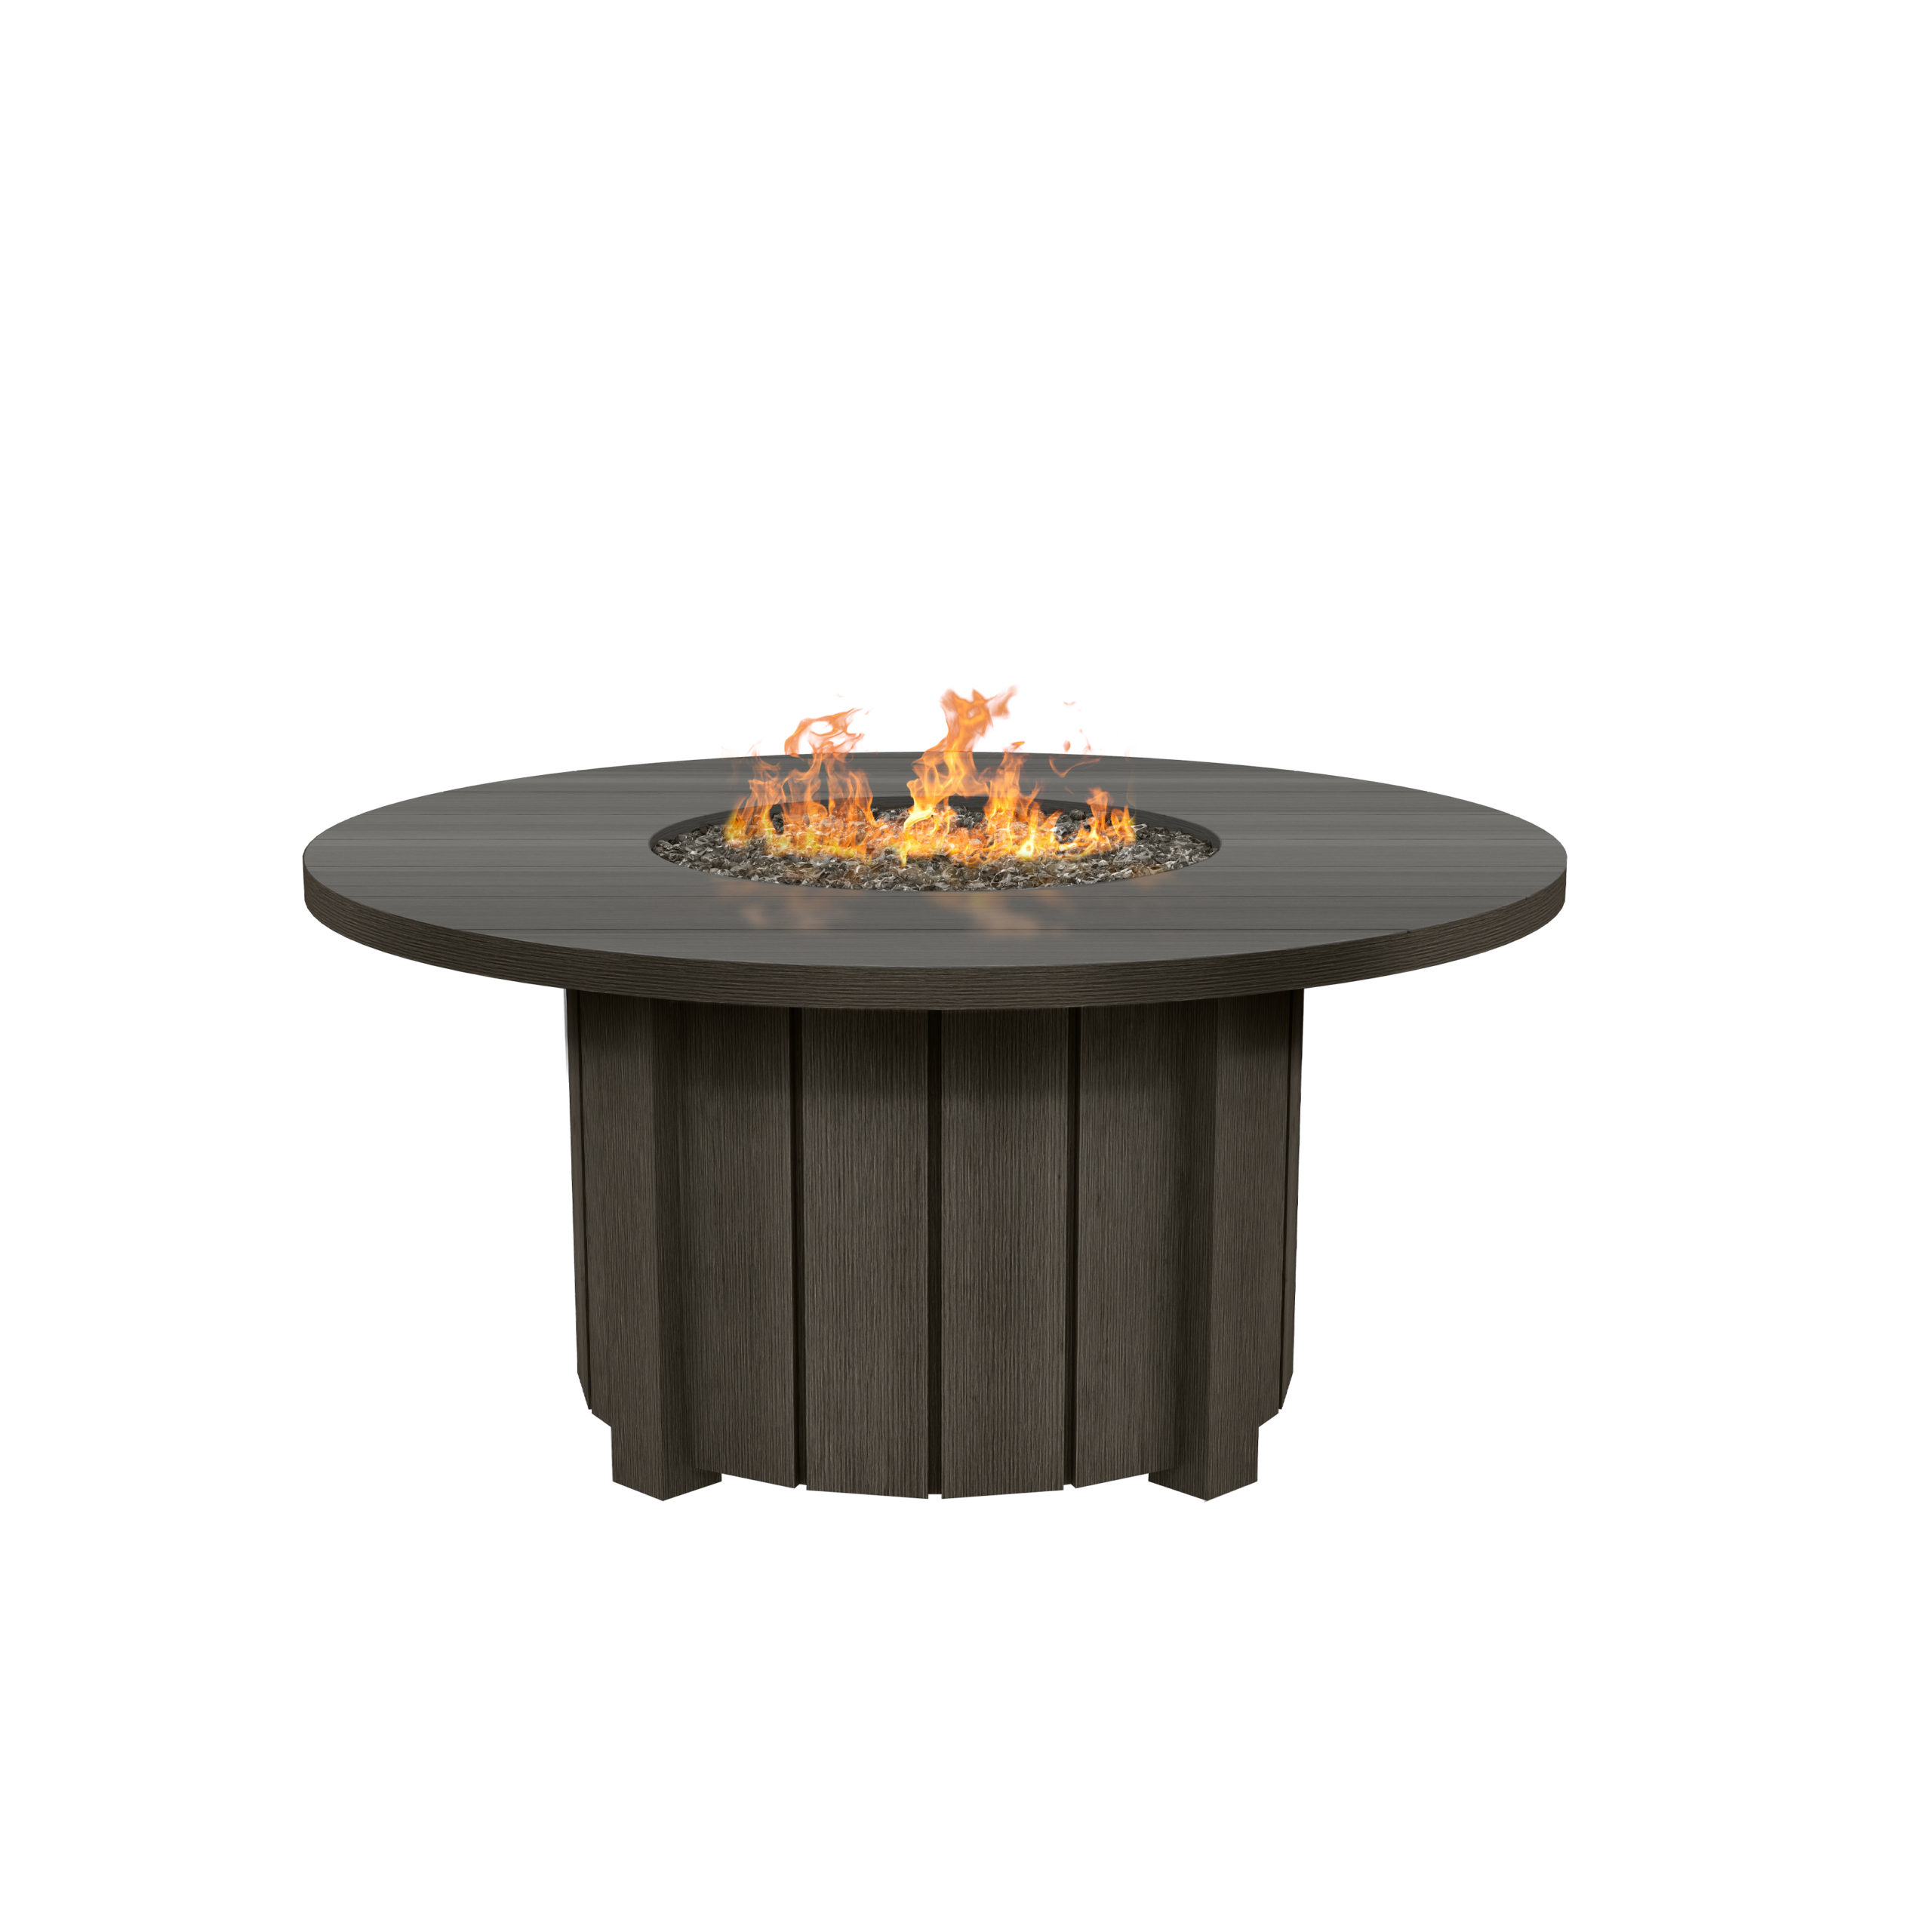 To 50 Round Fire Pit Florida, Fire Pit Under $50